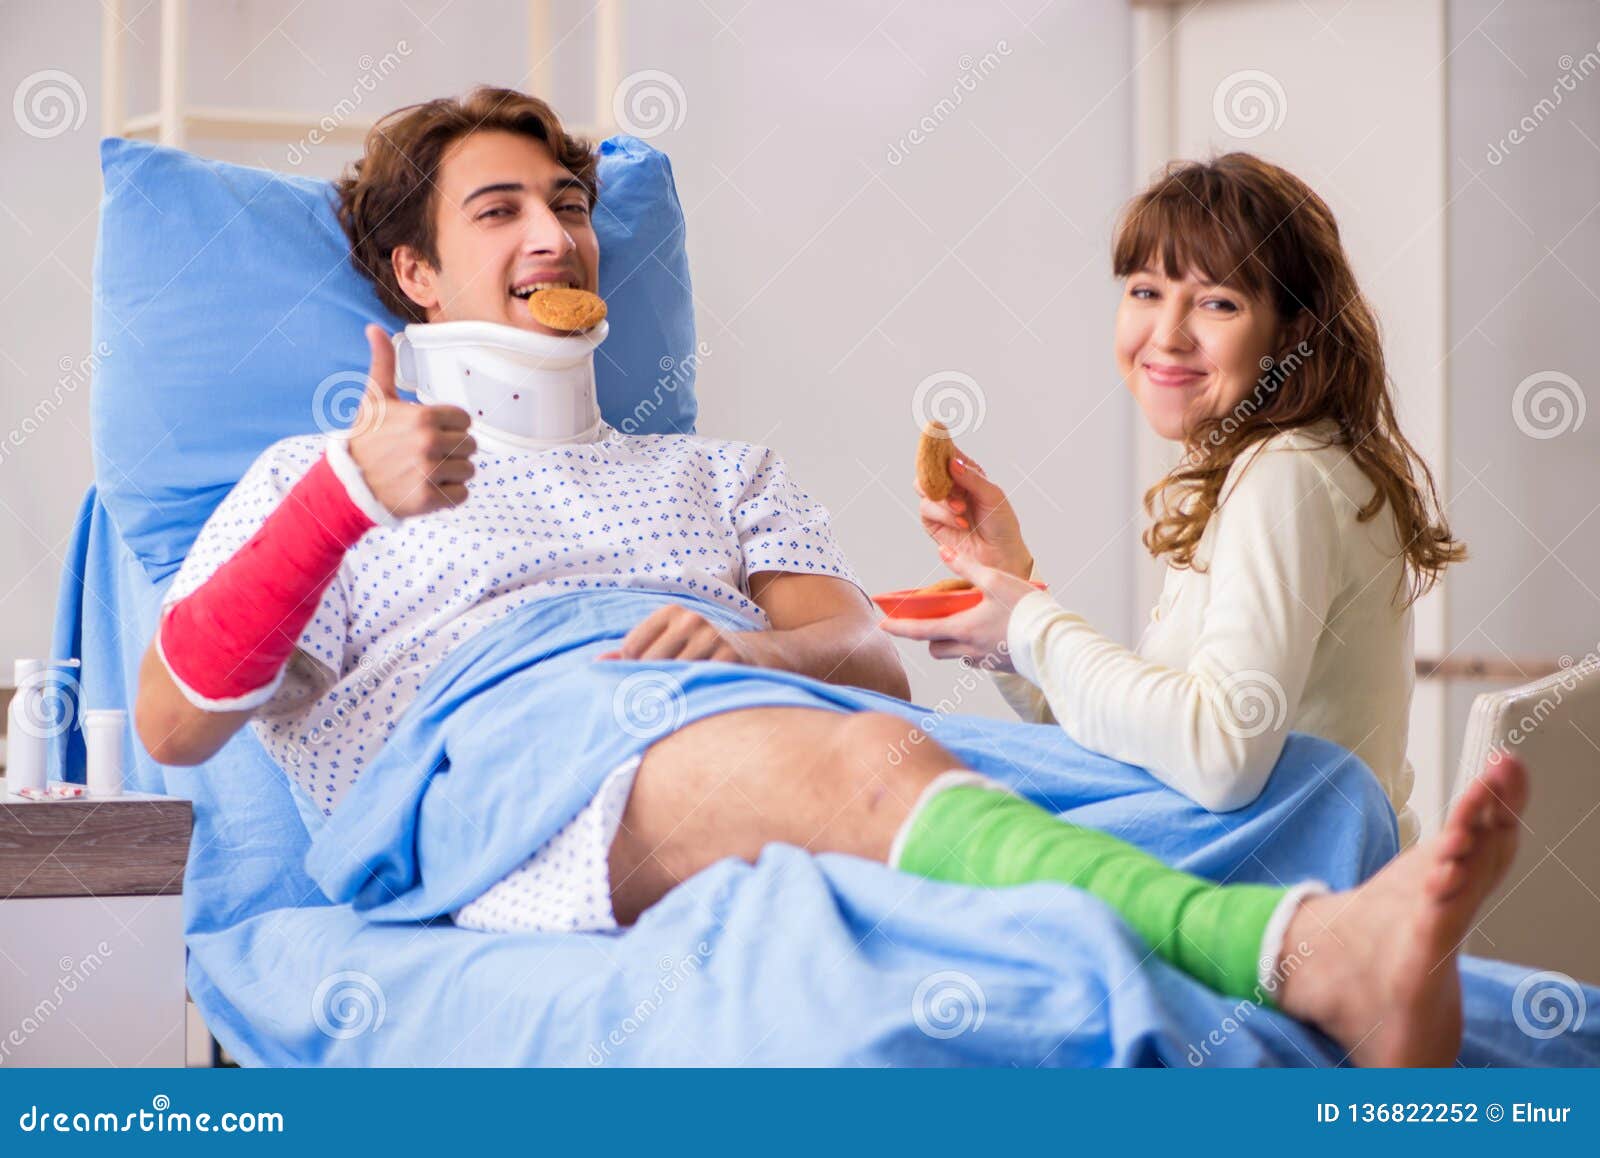 The Loving Wife Looking after Injured Husband in Hospital Stock Photo ... image